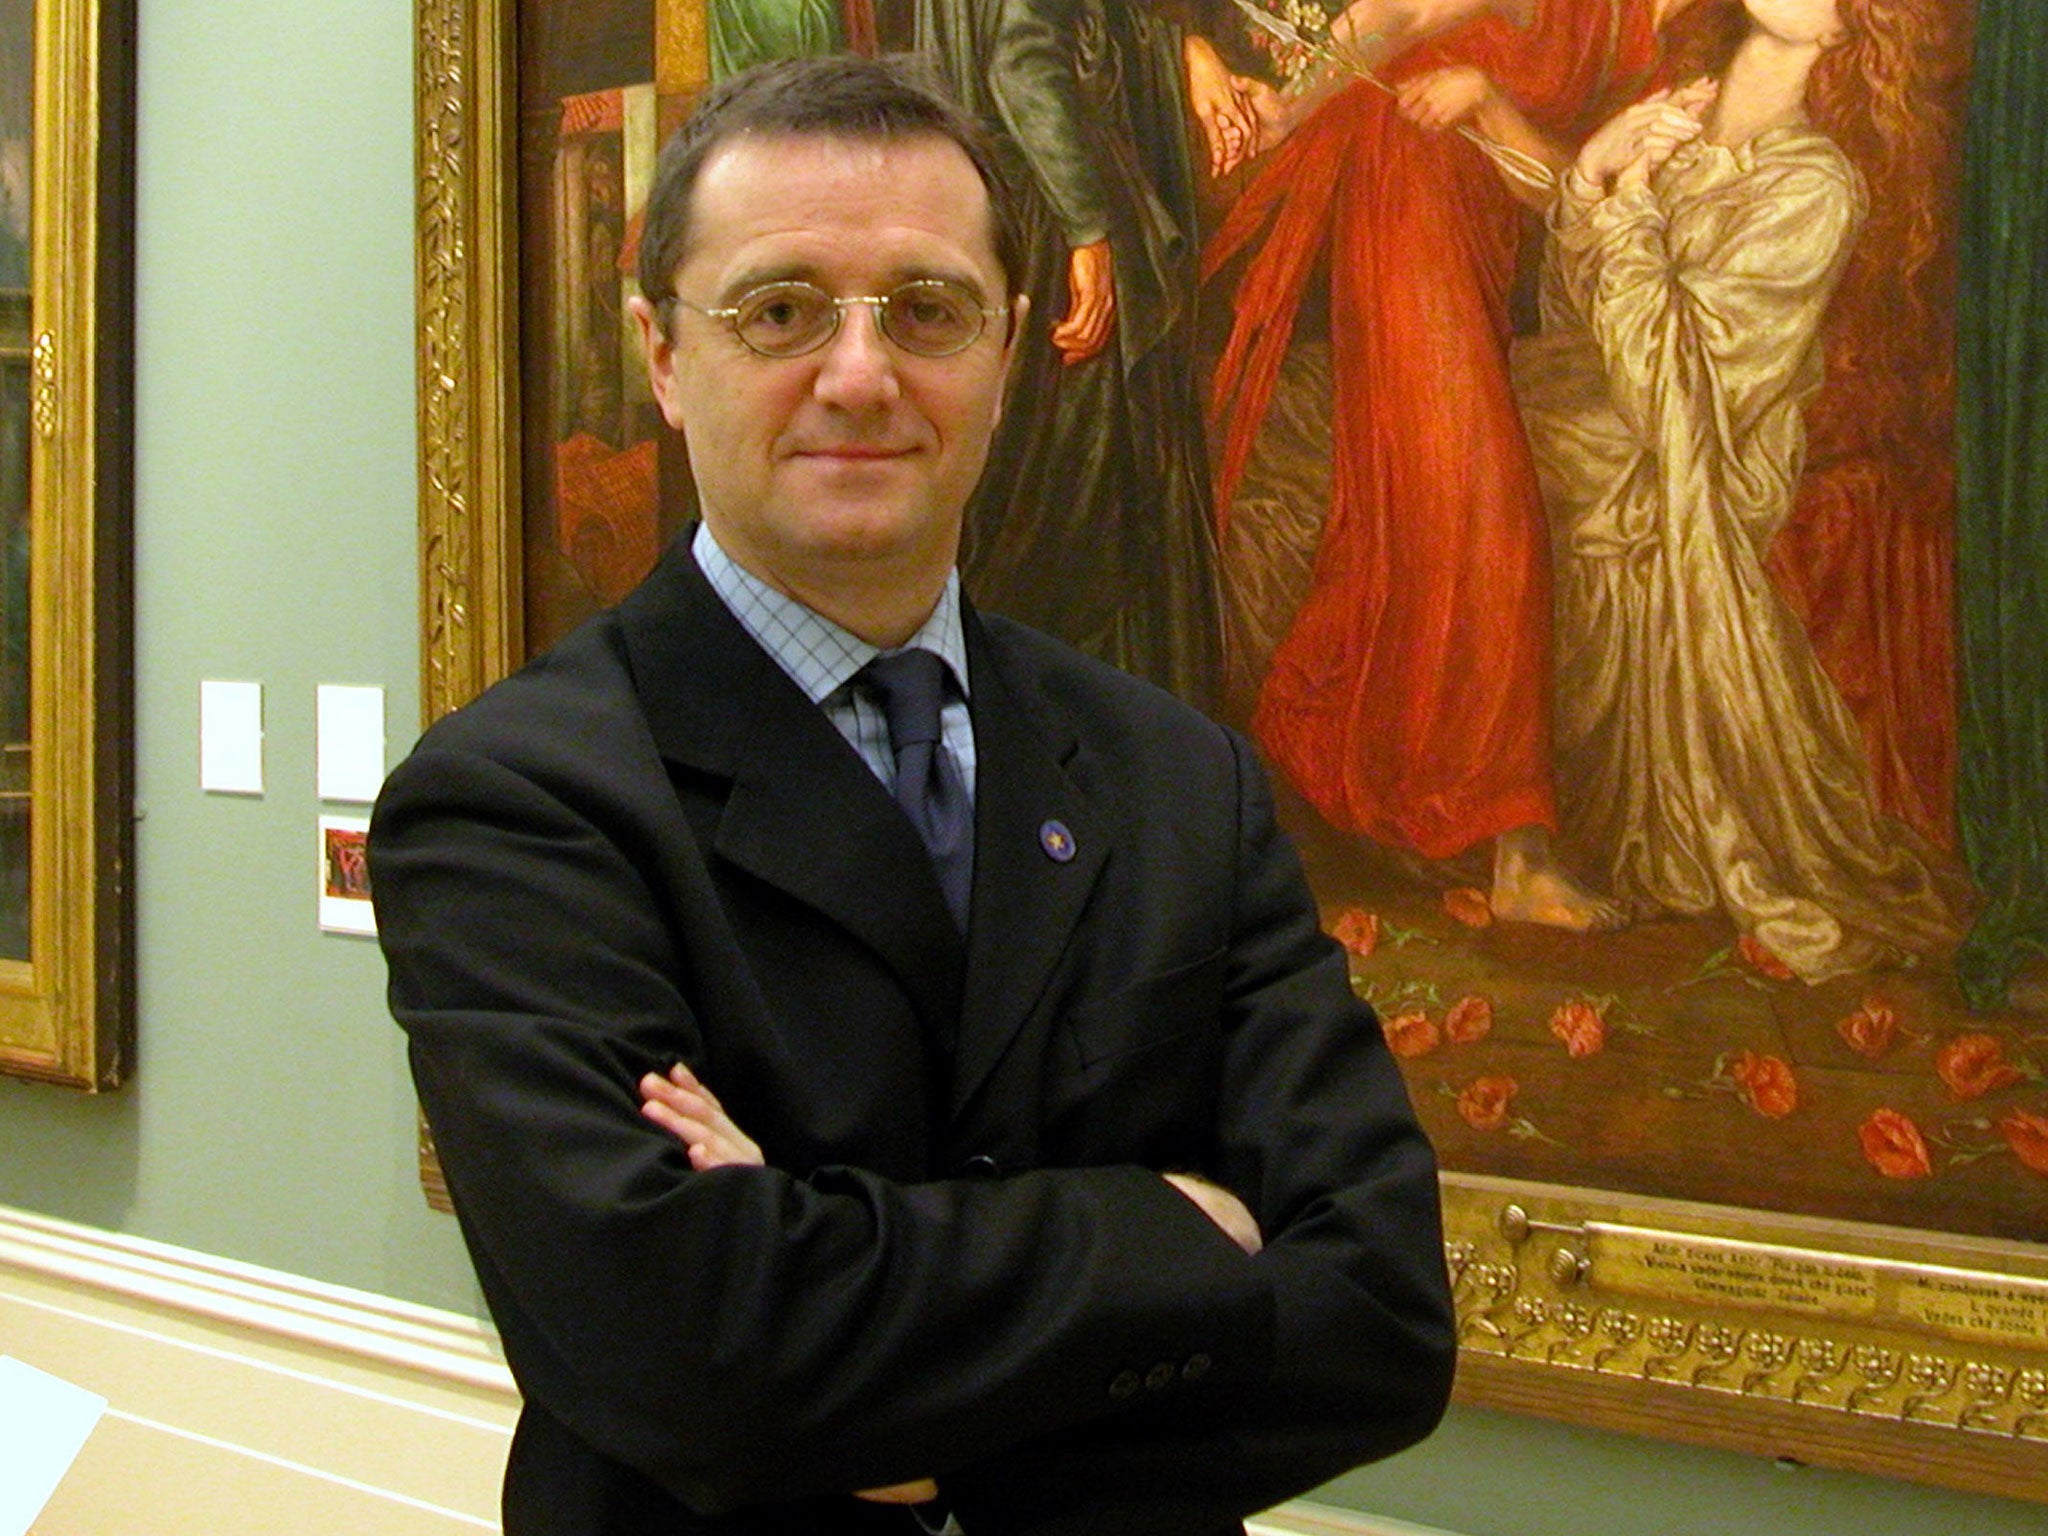 David Fleming believes museums need to move forward